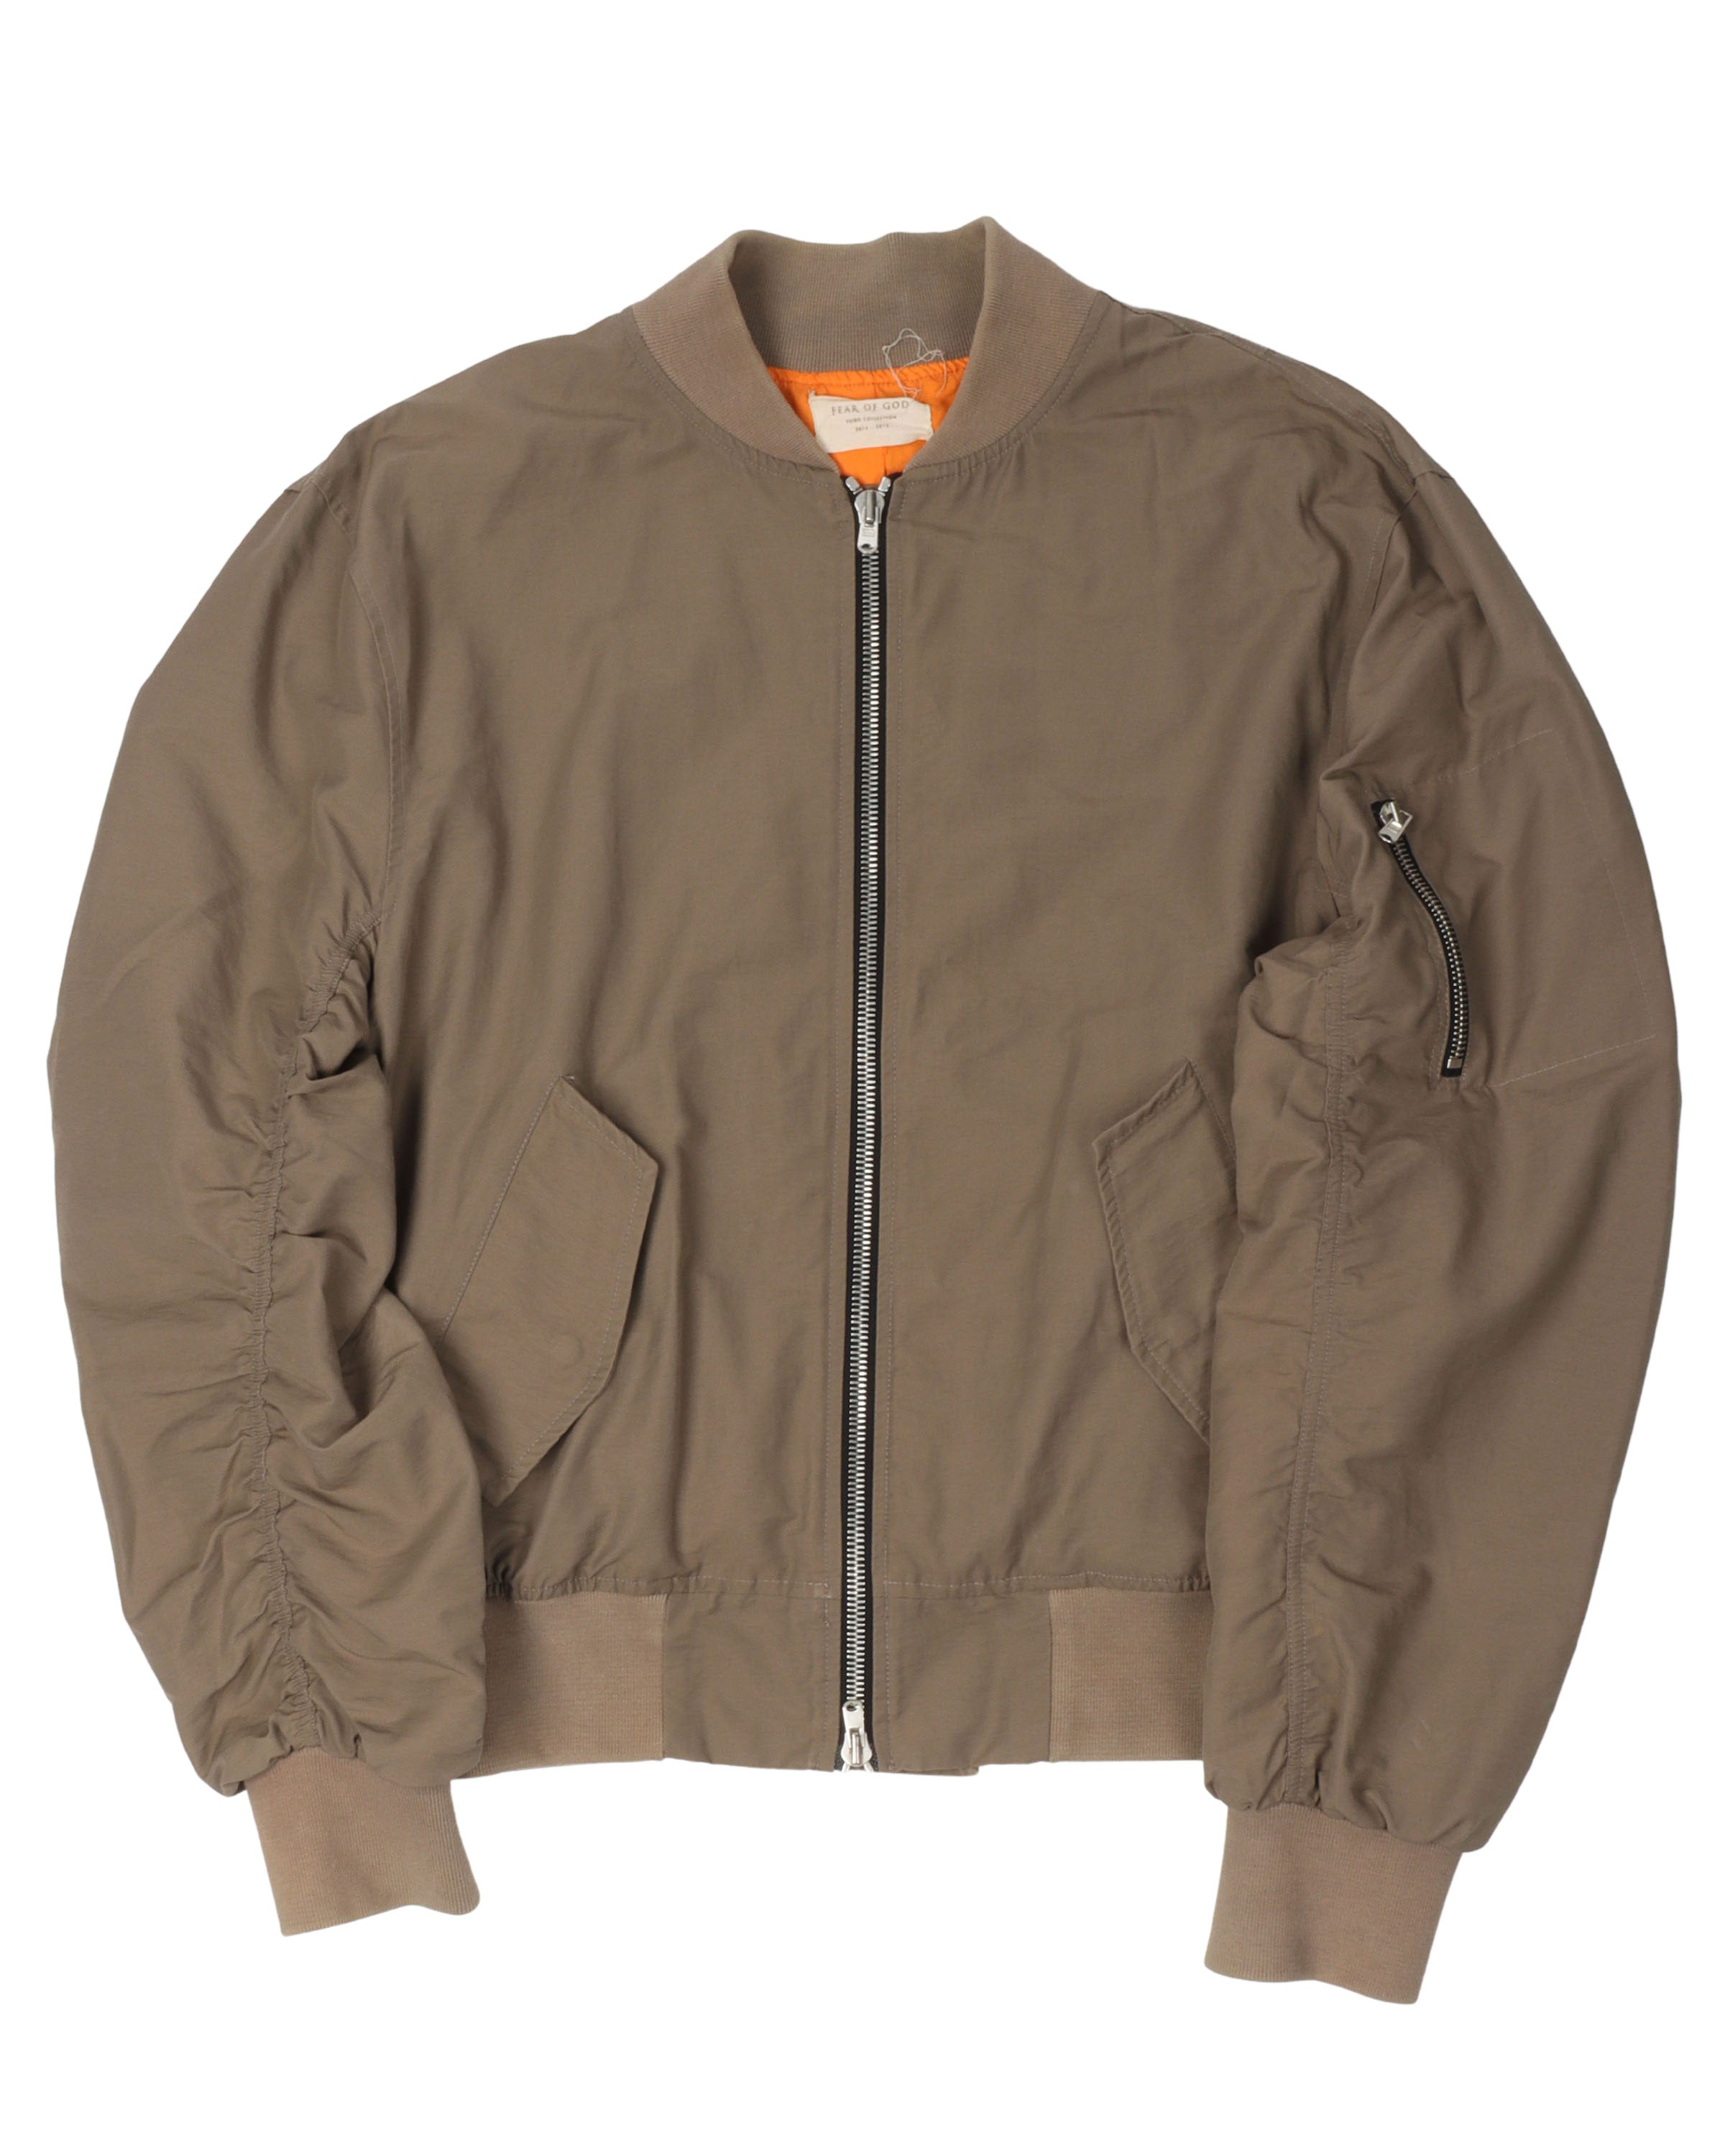 Fear of God Third Collection Bomber Jacket